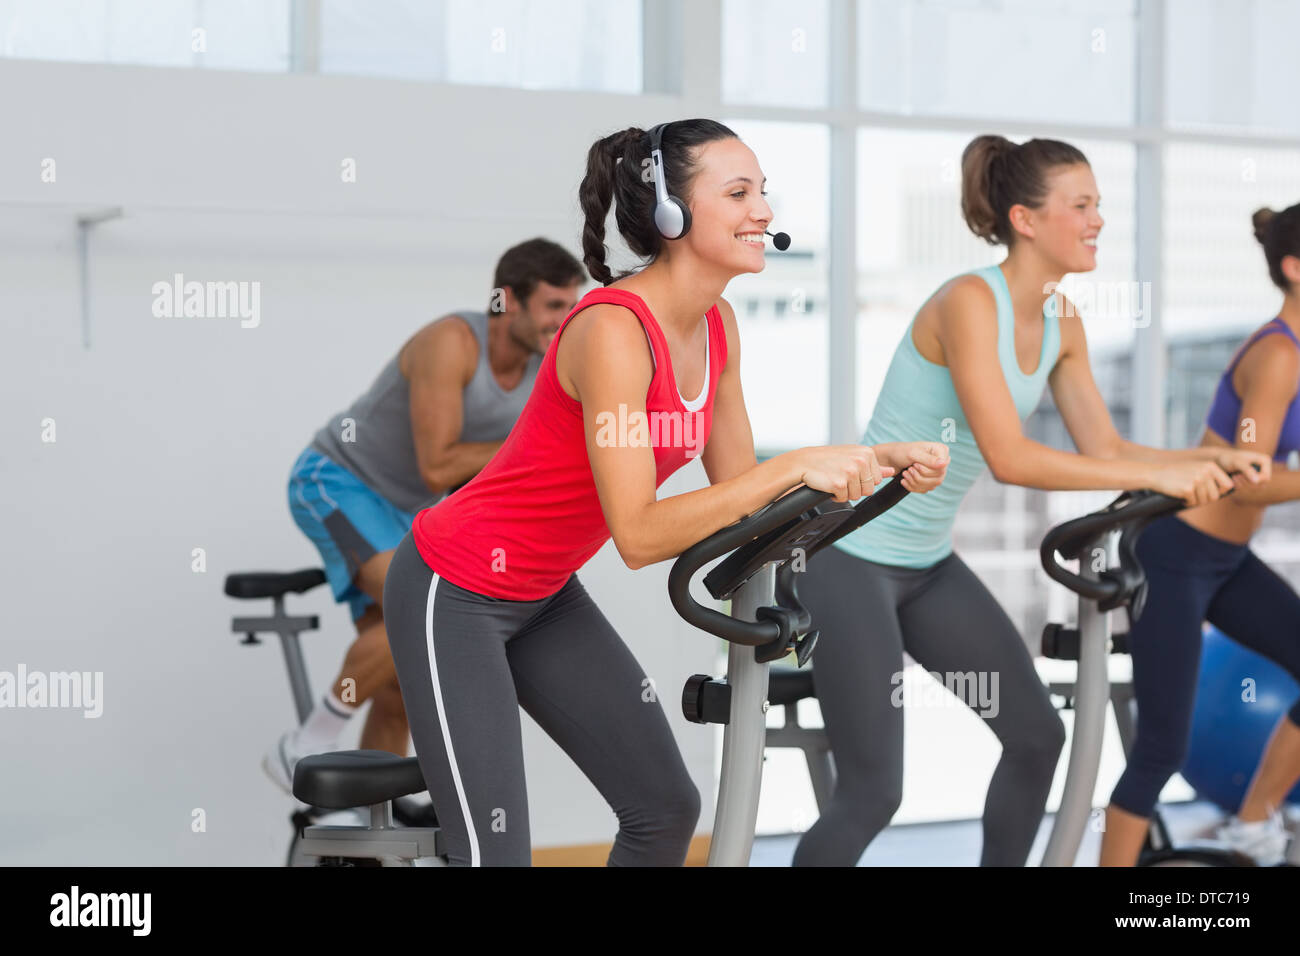 Fit people working out at spinning class Stock Photo - Alamy